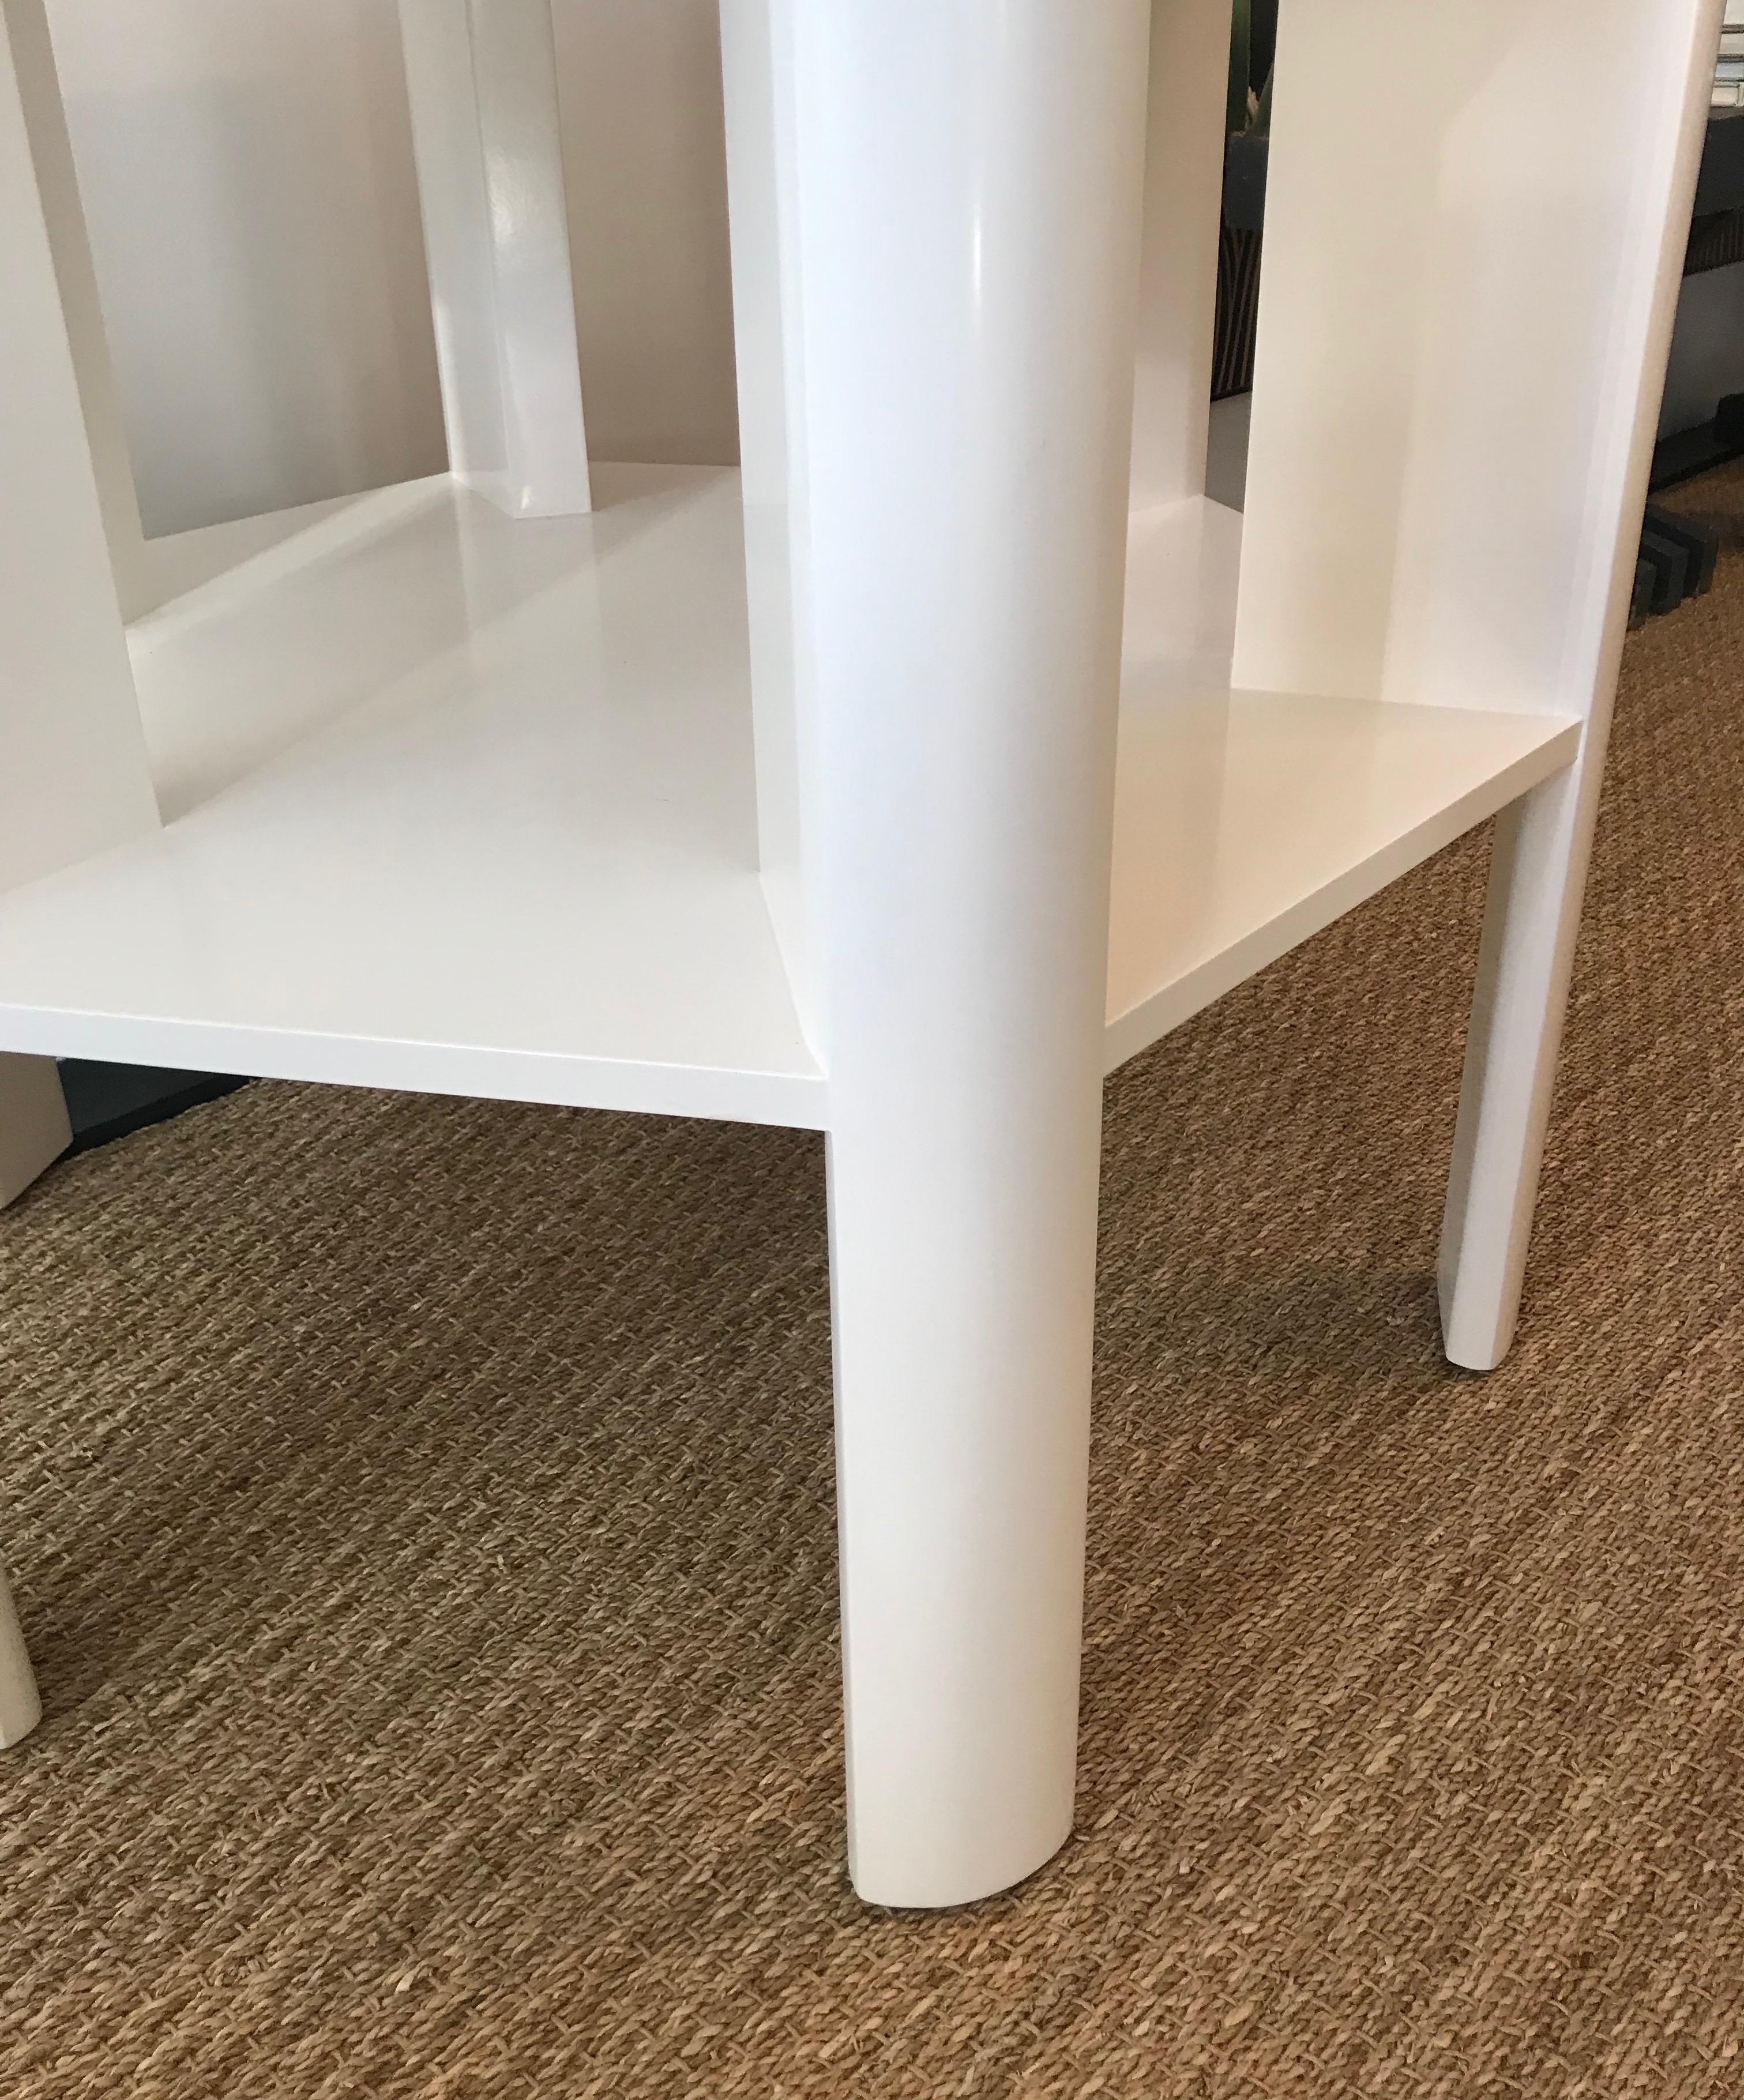 Martin and Brockett's library table is a chic work horse. Stripped of unnecessary details, its minimalist design makes this table functional for sober book storage or as an efficient small space bar (bottle storage below frees up the table top for